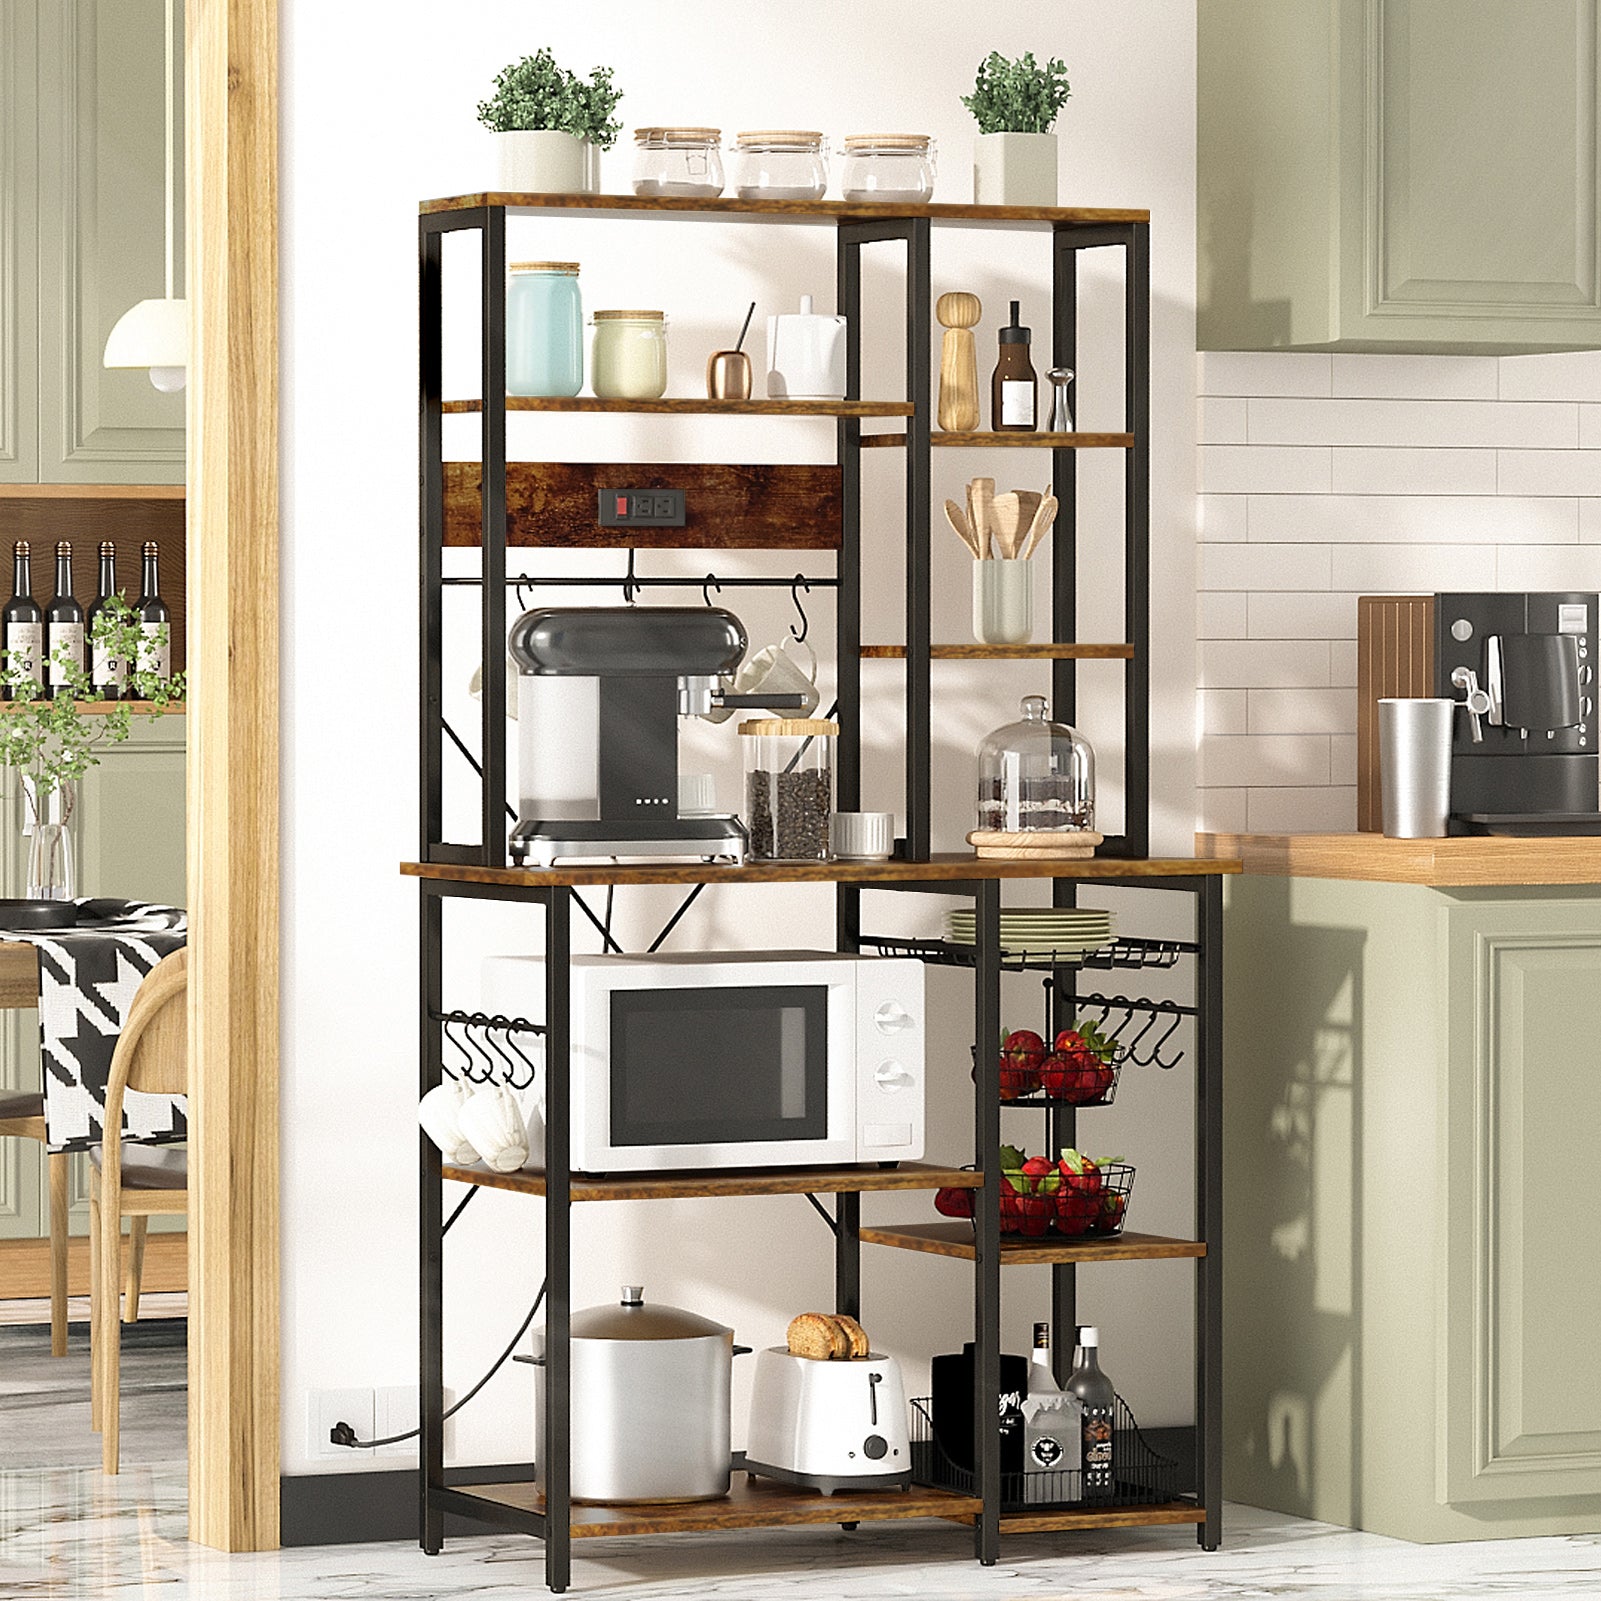  Free Standing Kitchen Units, 6-Tier Bakers Rack